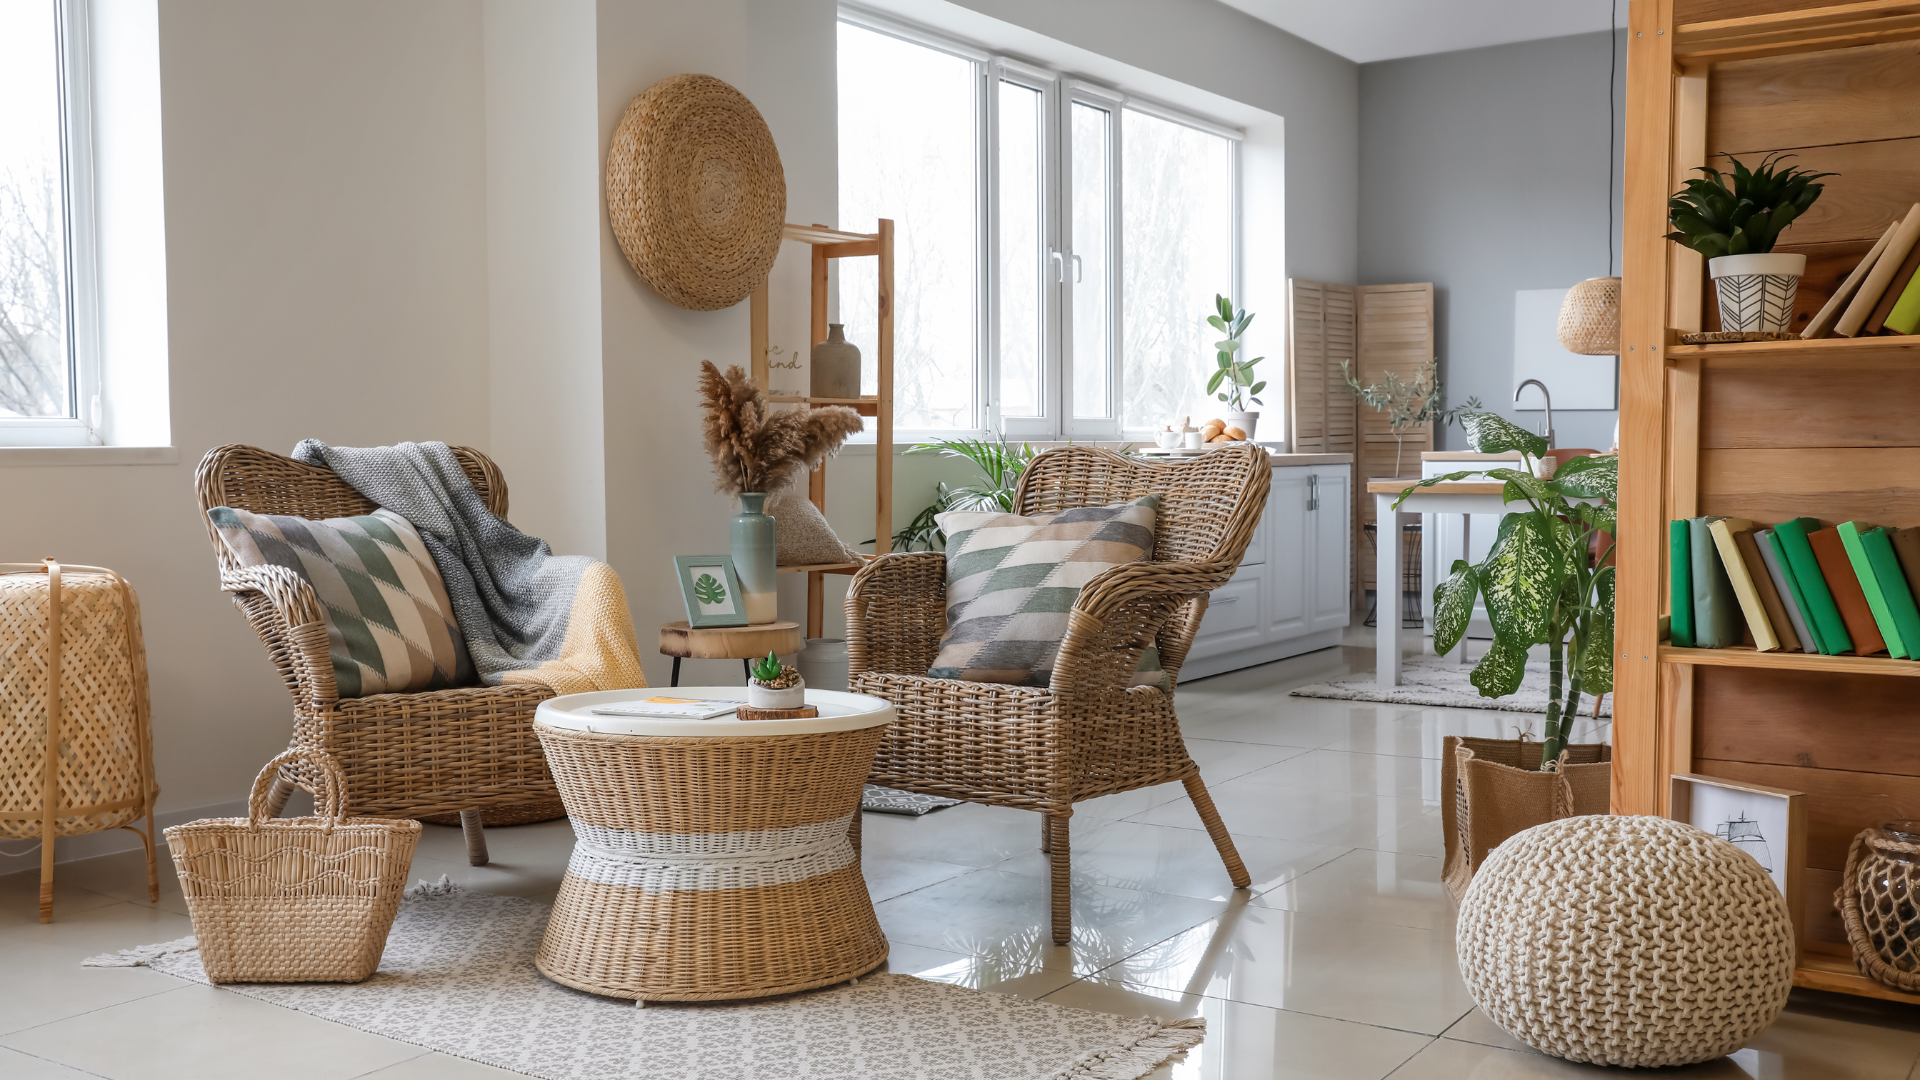 How to Care for Wicker Furniture